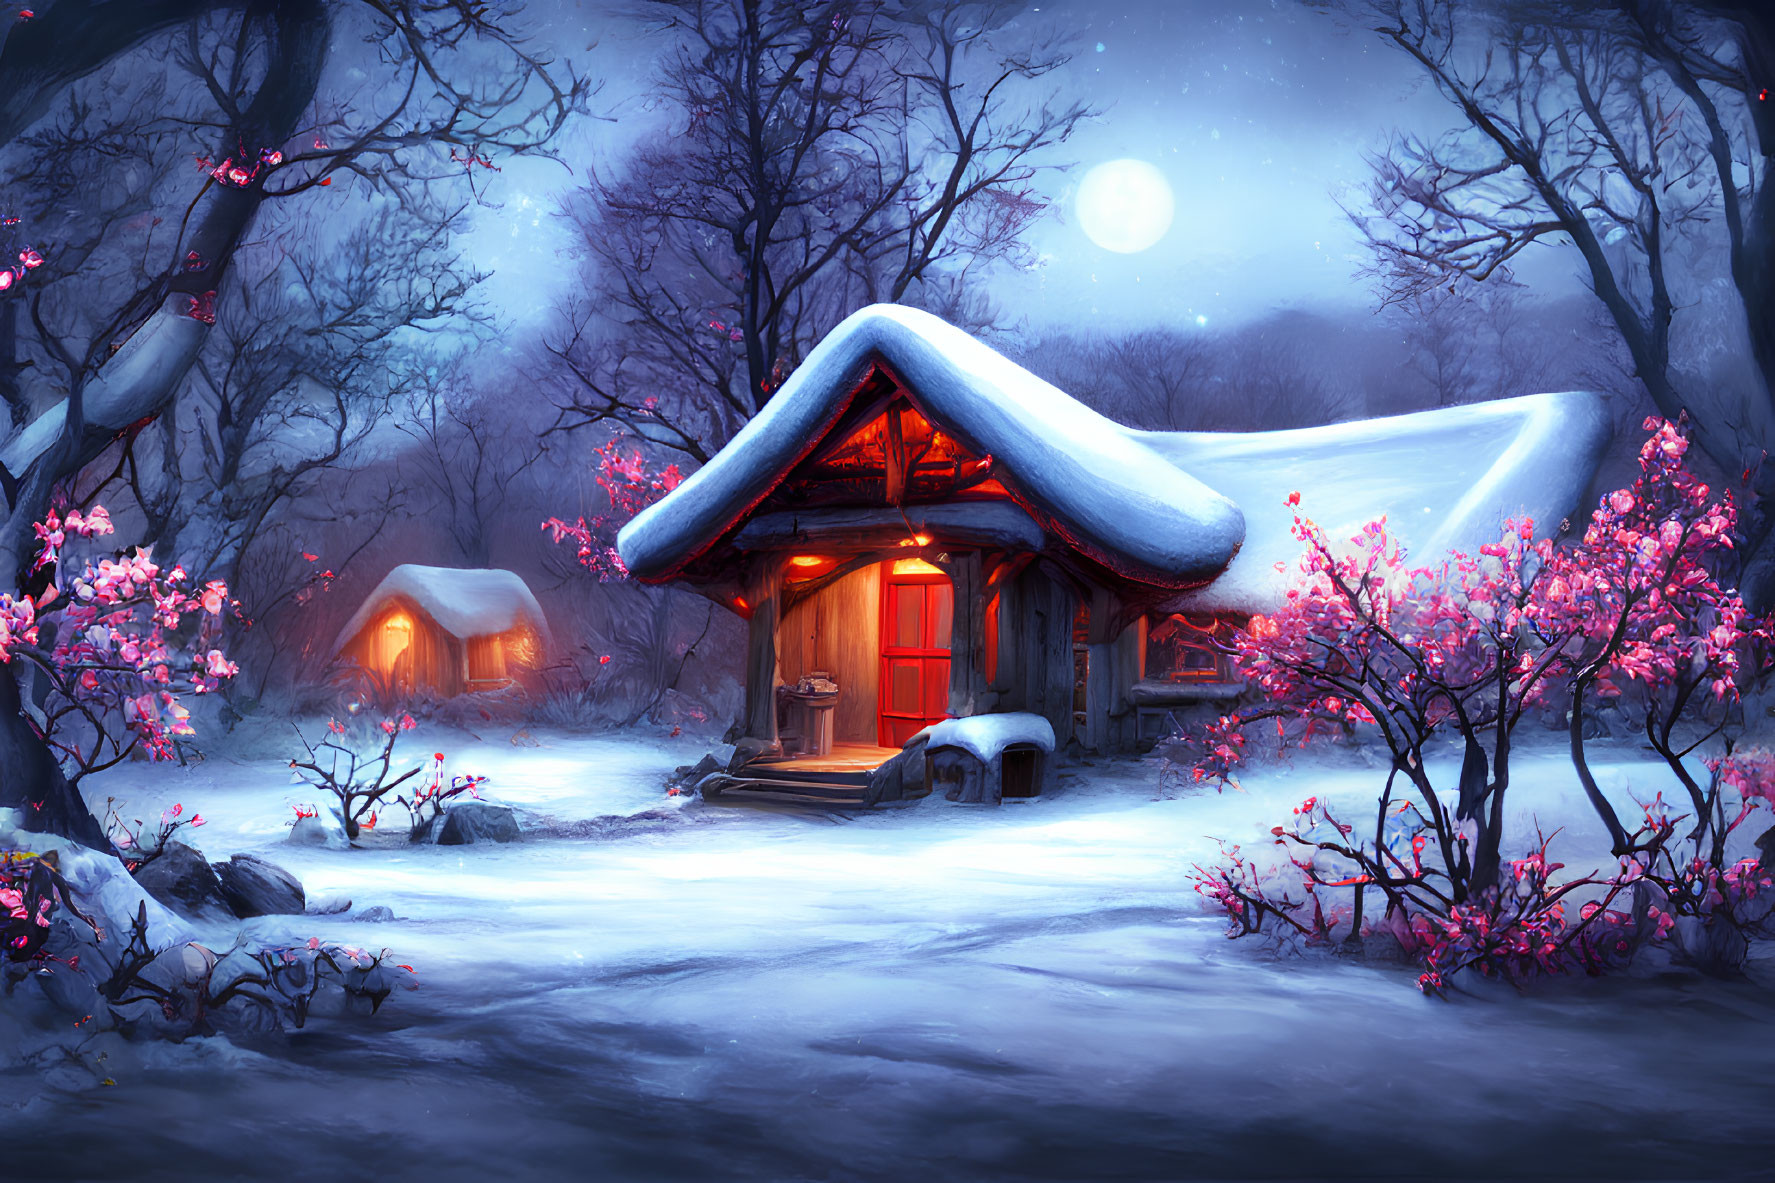 Snow-covered cabin surrounded by blooming cherry trees on winter night